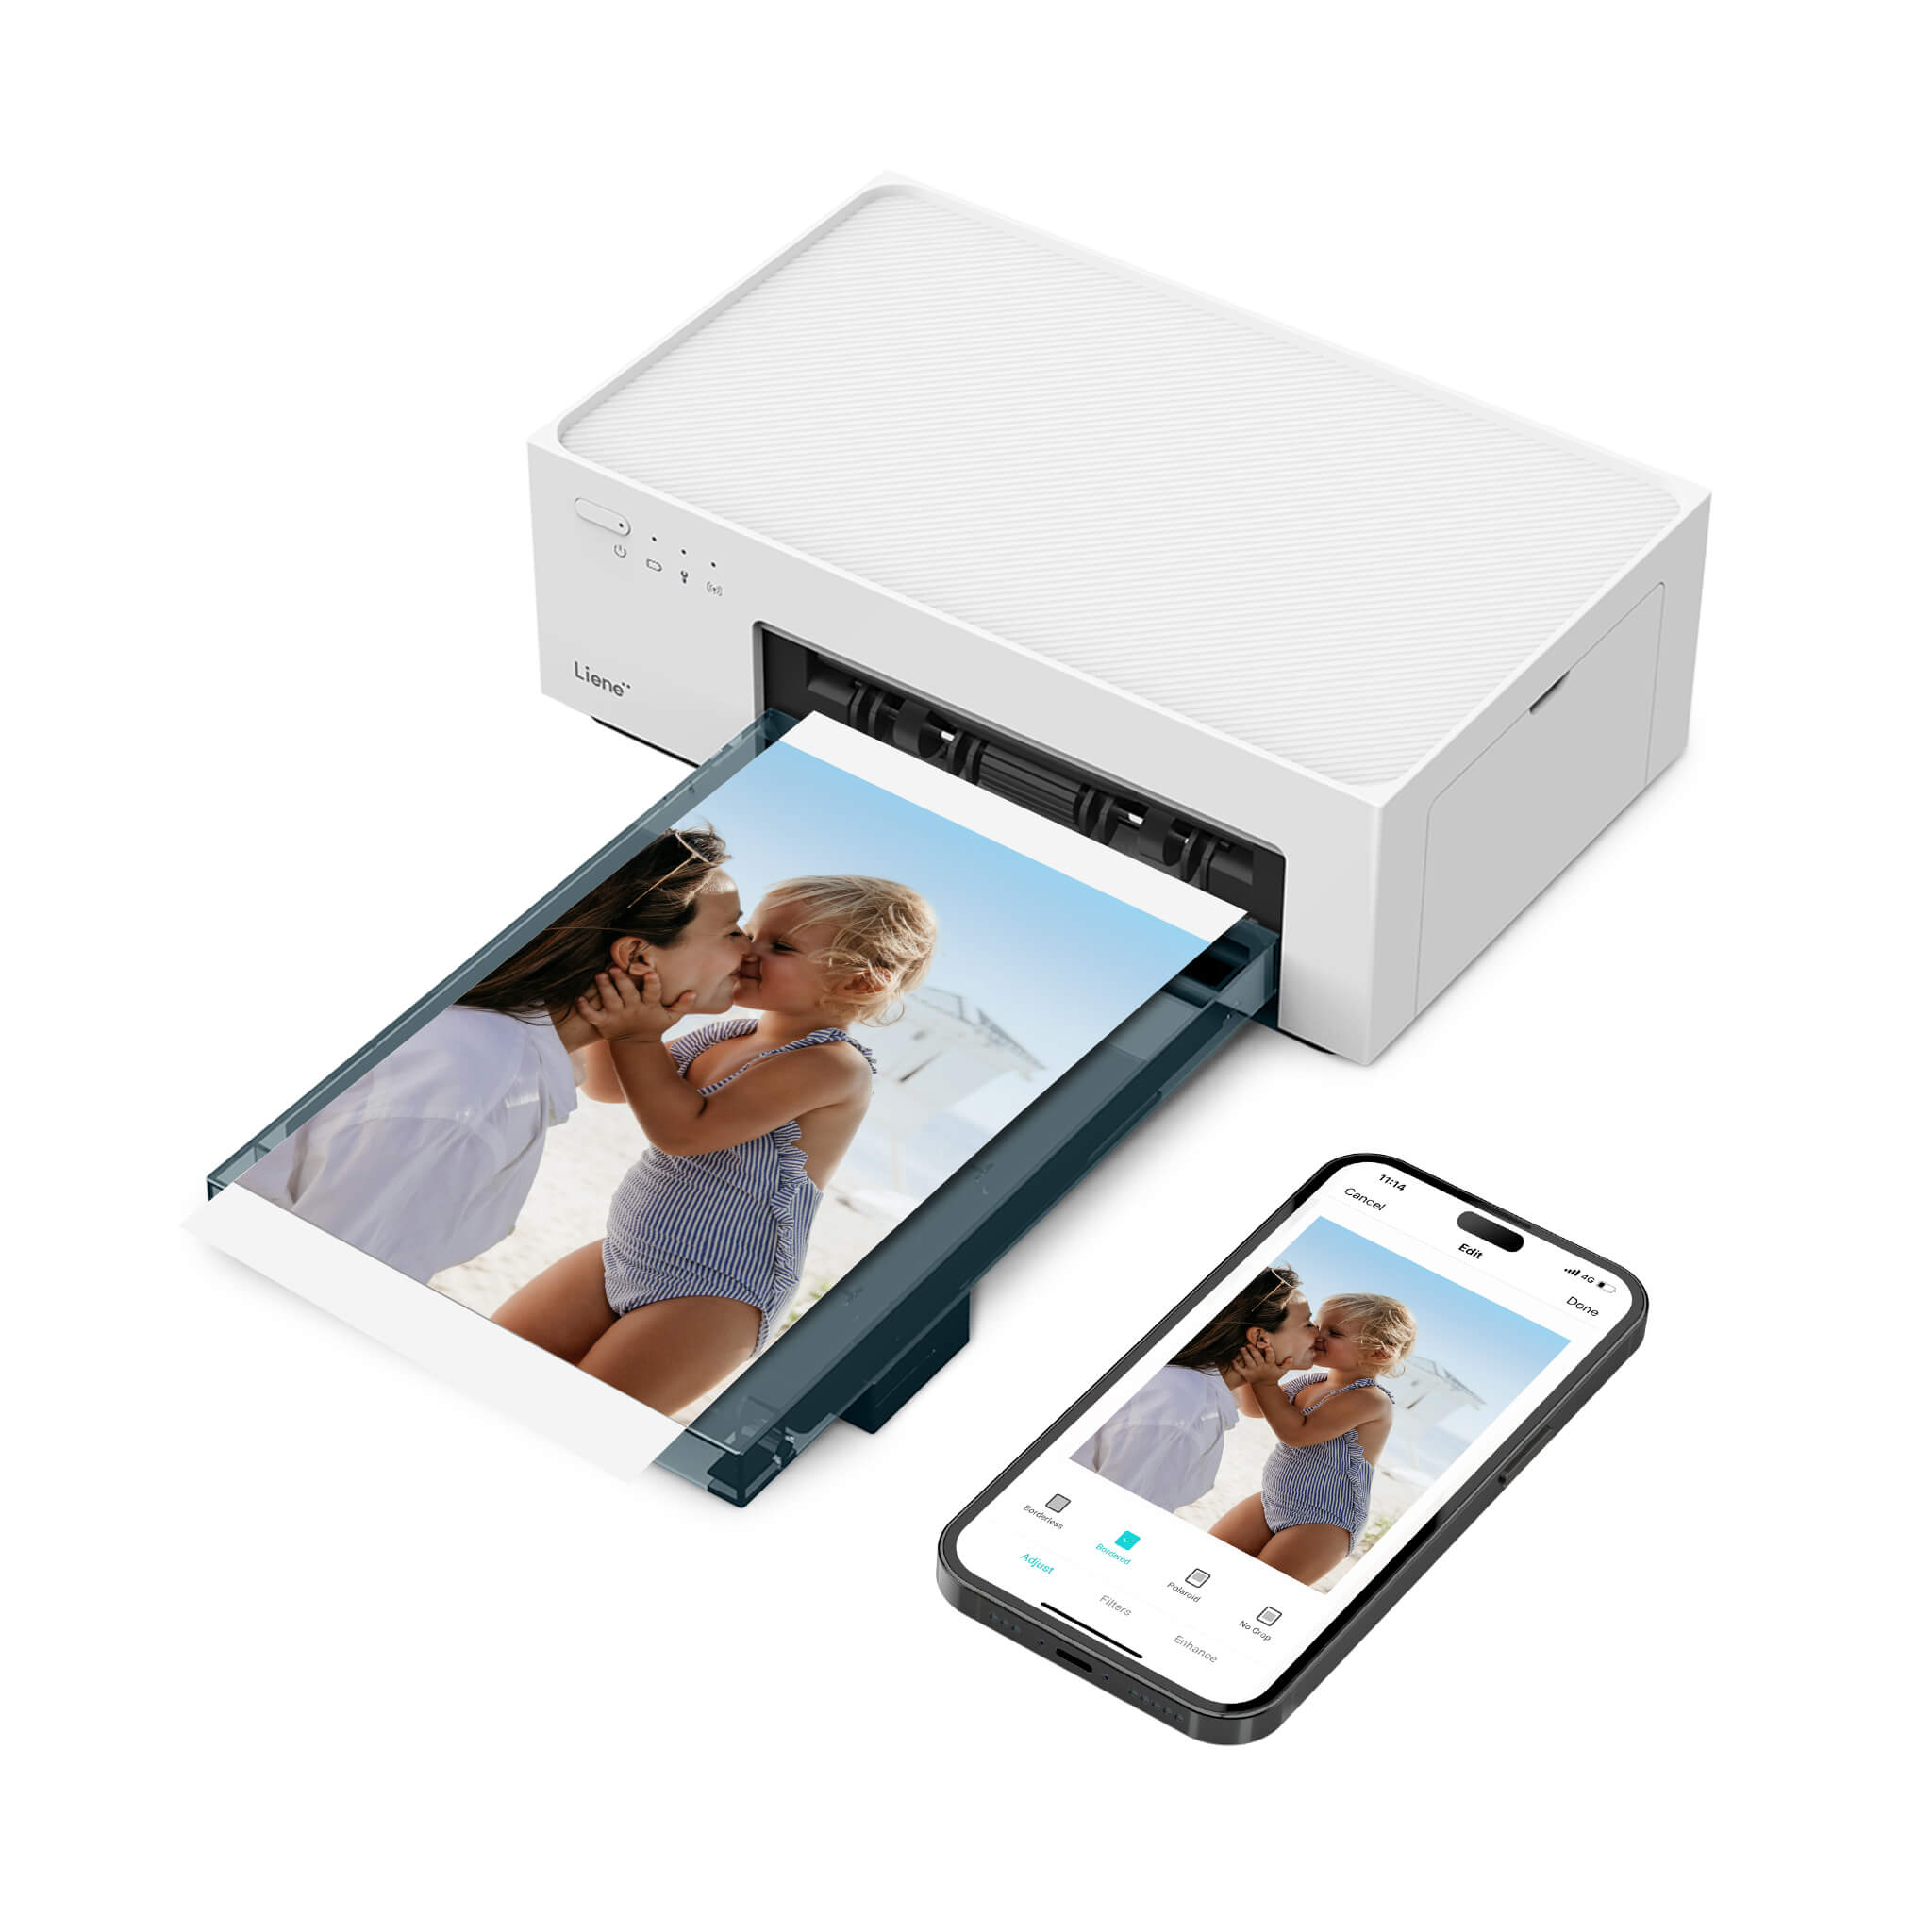 Liene Amber 4x6" Instant Photo Printer White (20 Photo Papers + 1 Cartridge)